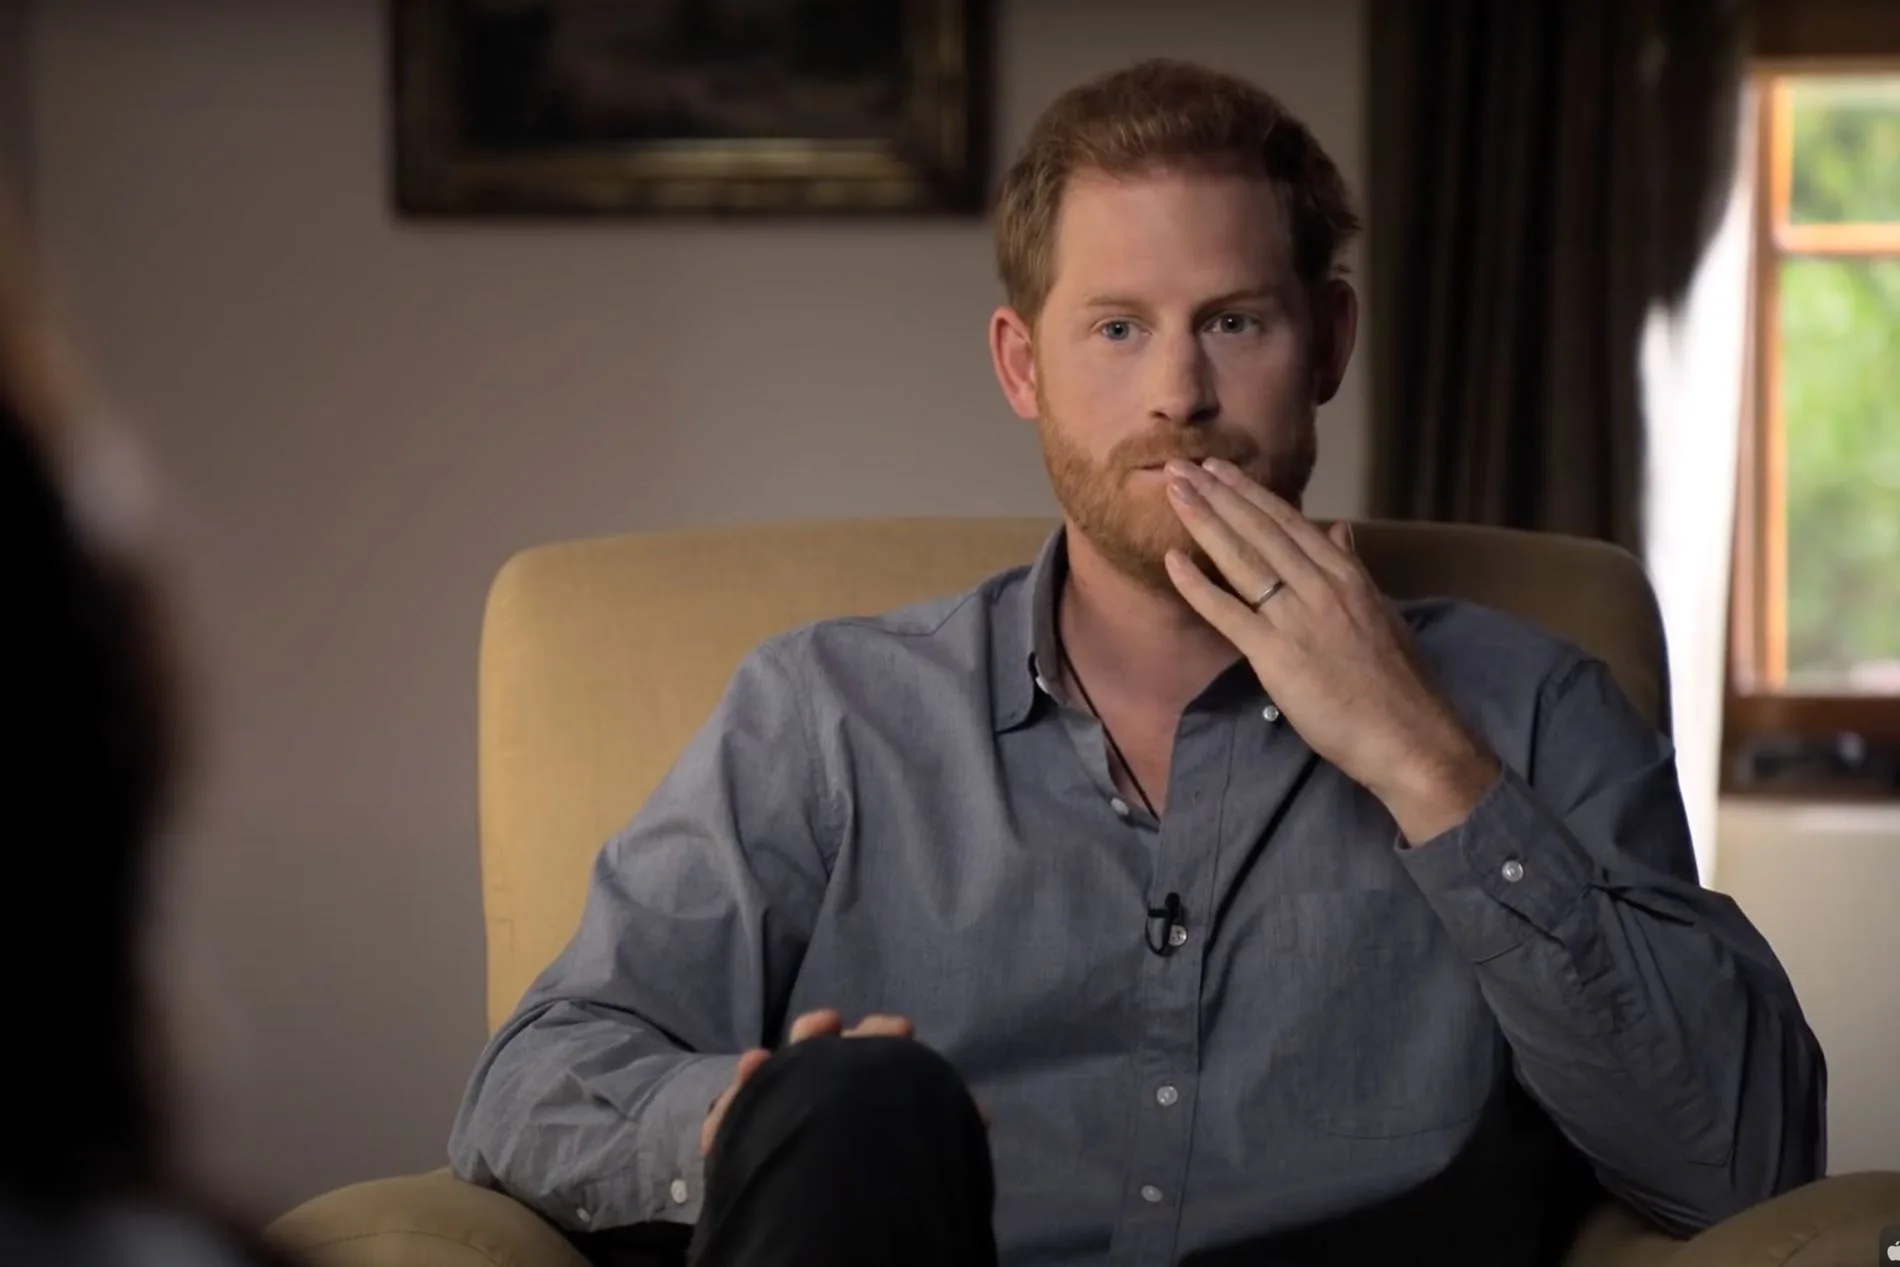 Prince Harry: Therapy Can Better Mental Health